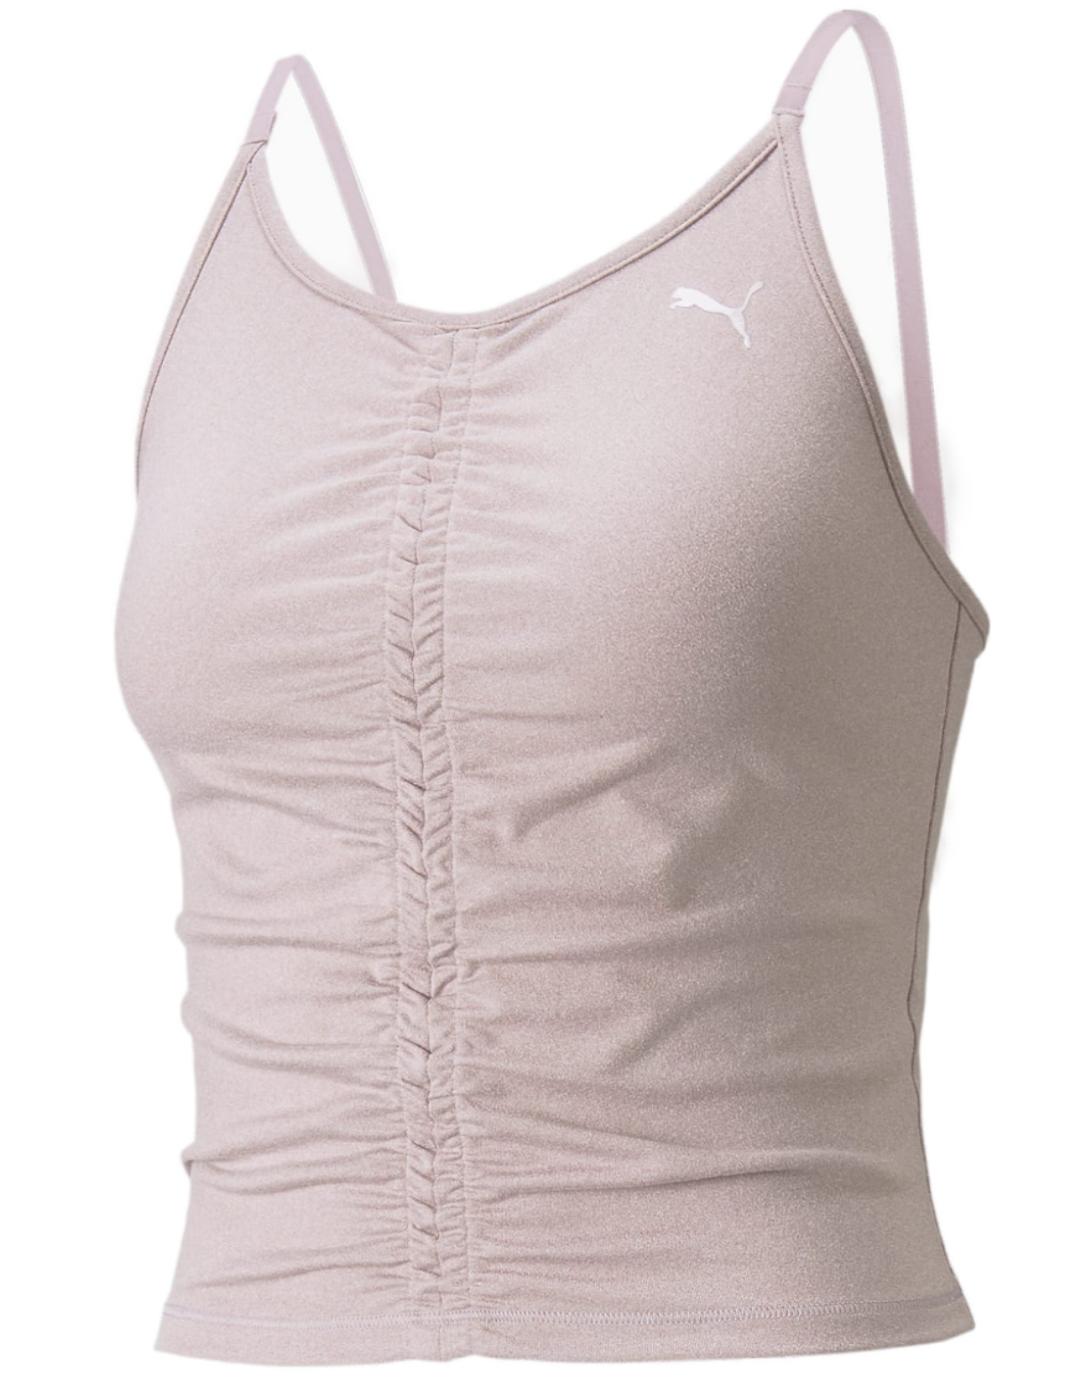 Top deporte Puma ruched lila para mujer -a